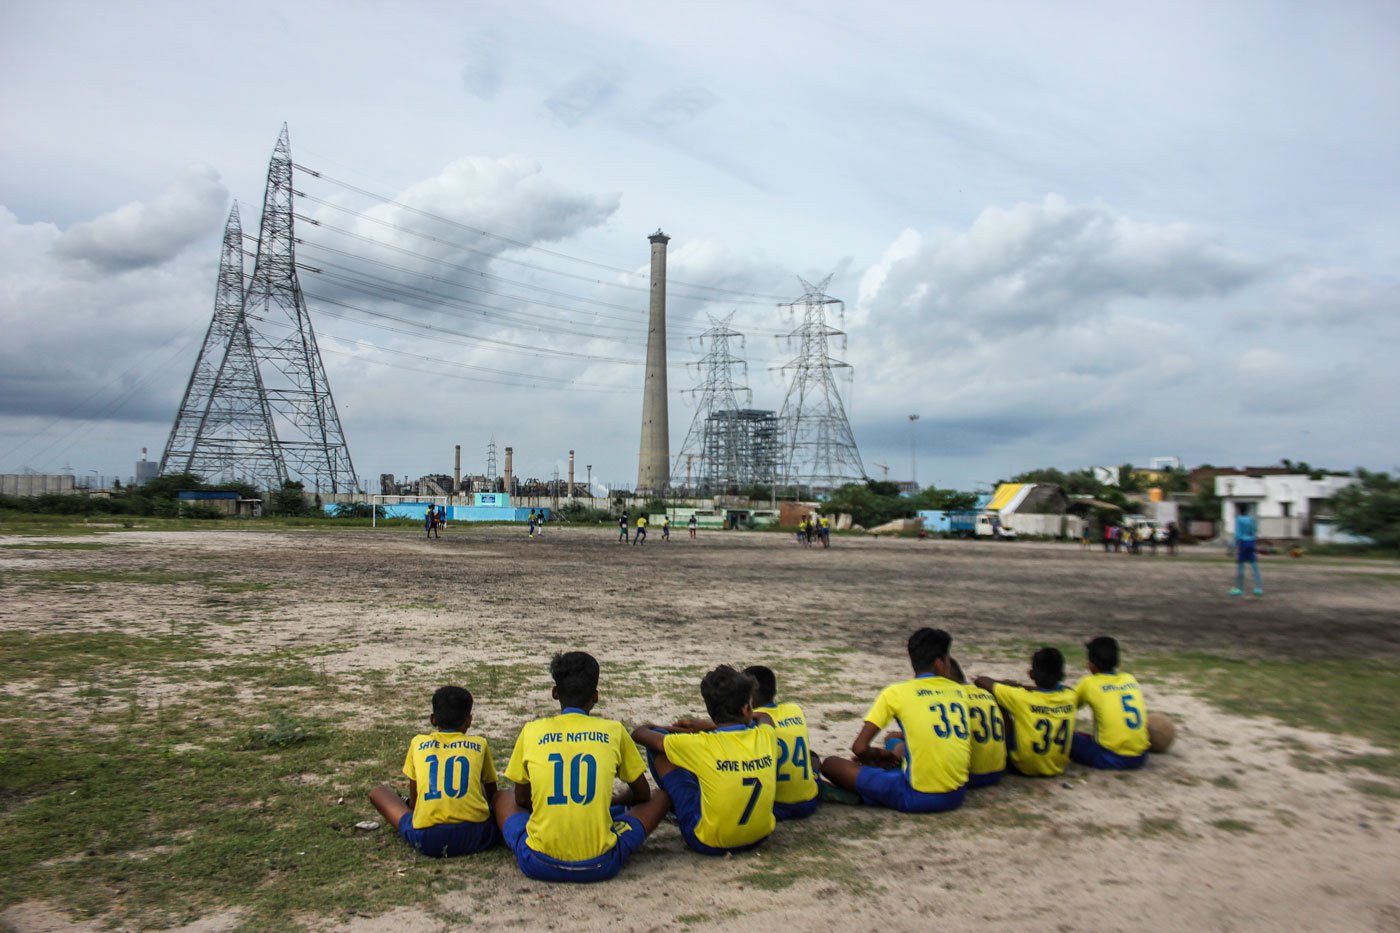 Industrial pollutants at the Ennore port near Chennai makes it unfit for human lives. Despite these conditions, children are training to become sportspersons.